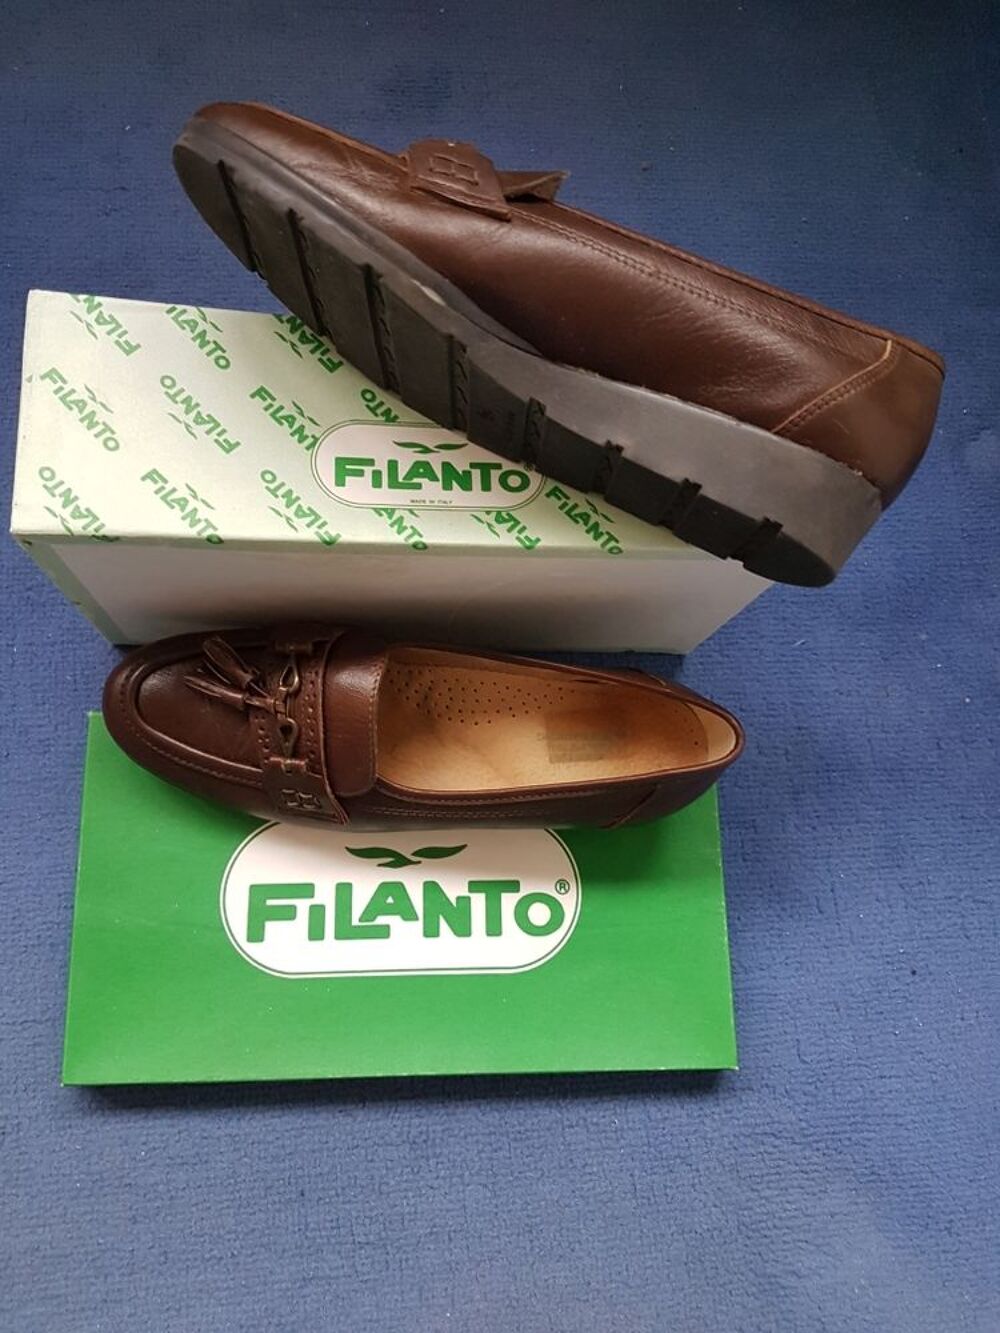 Chaussures Filanto made in Italy Chaussures